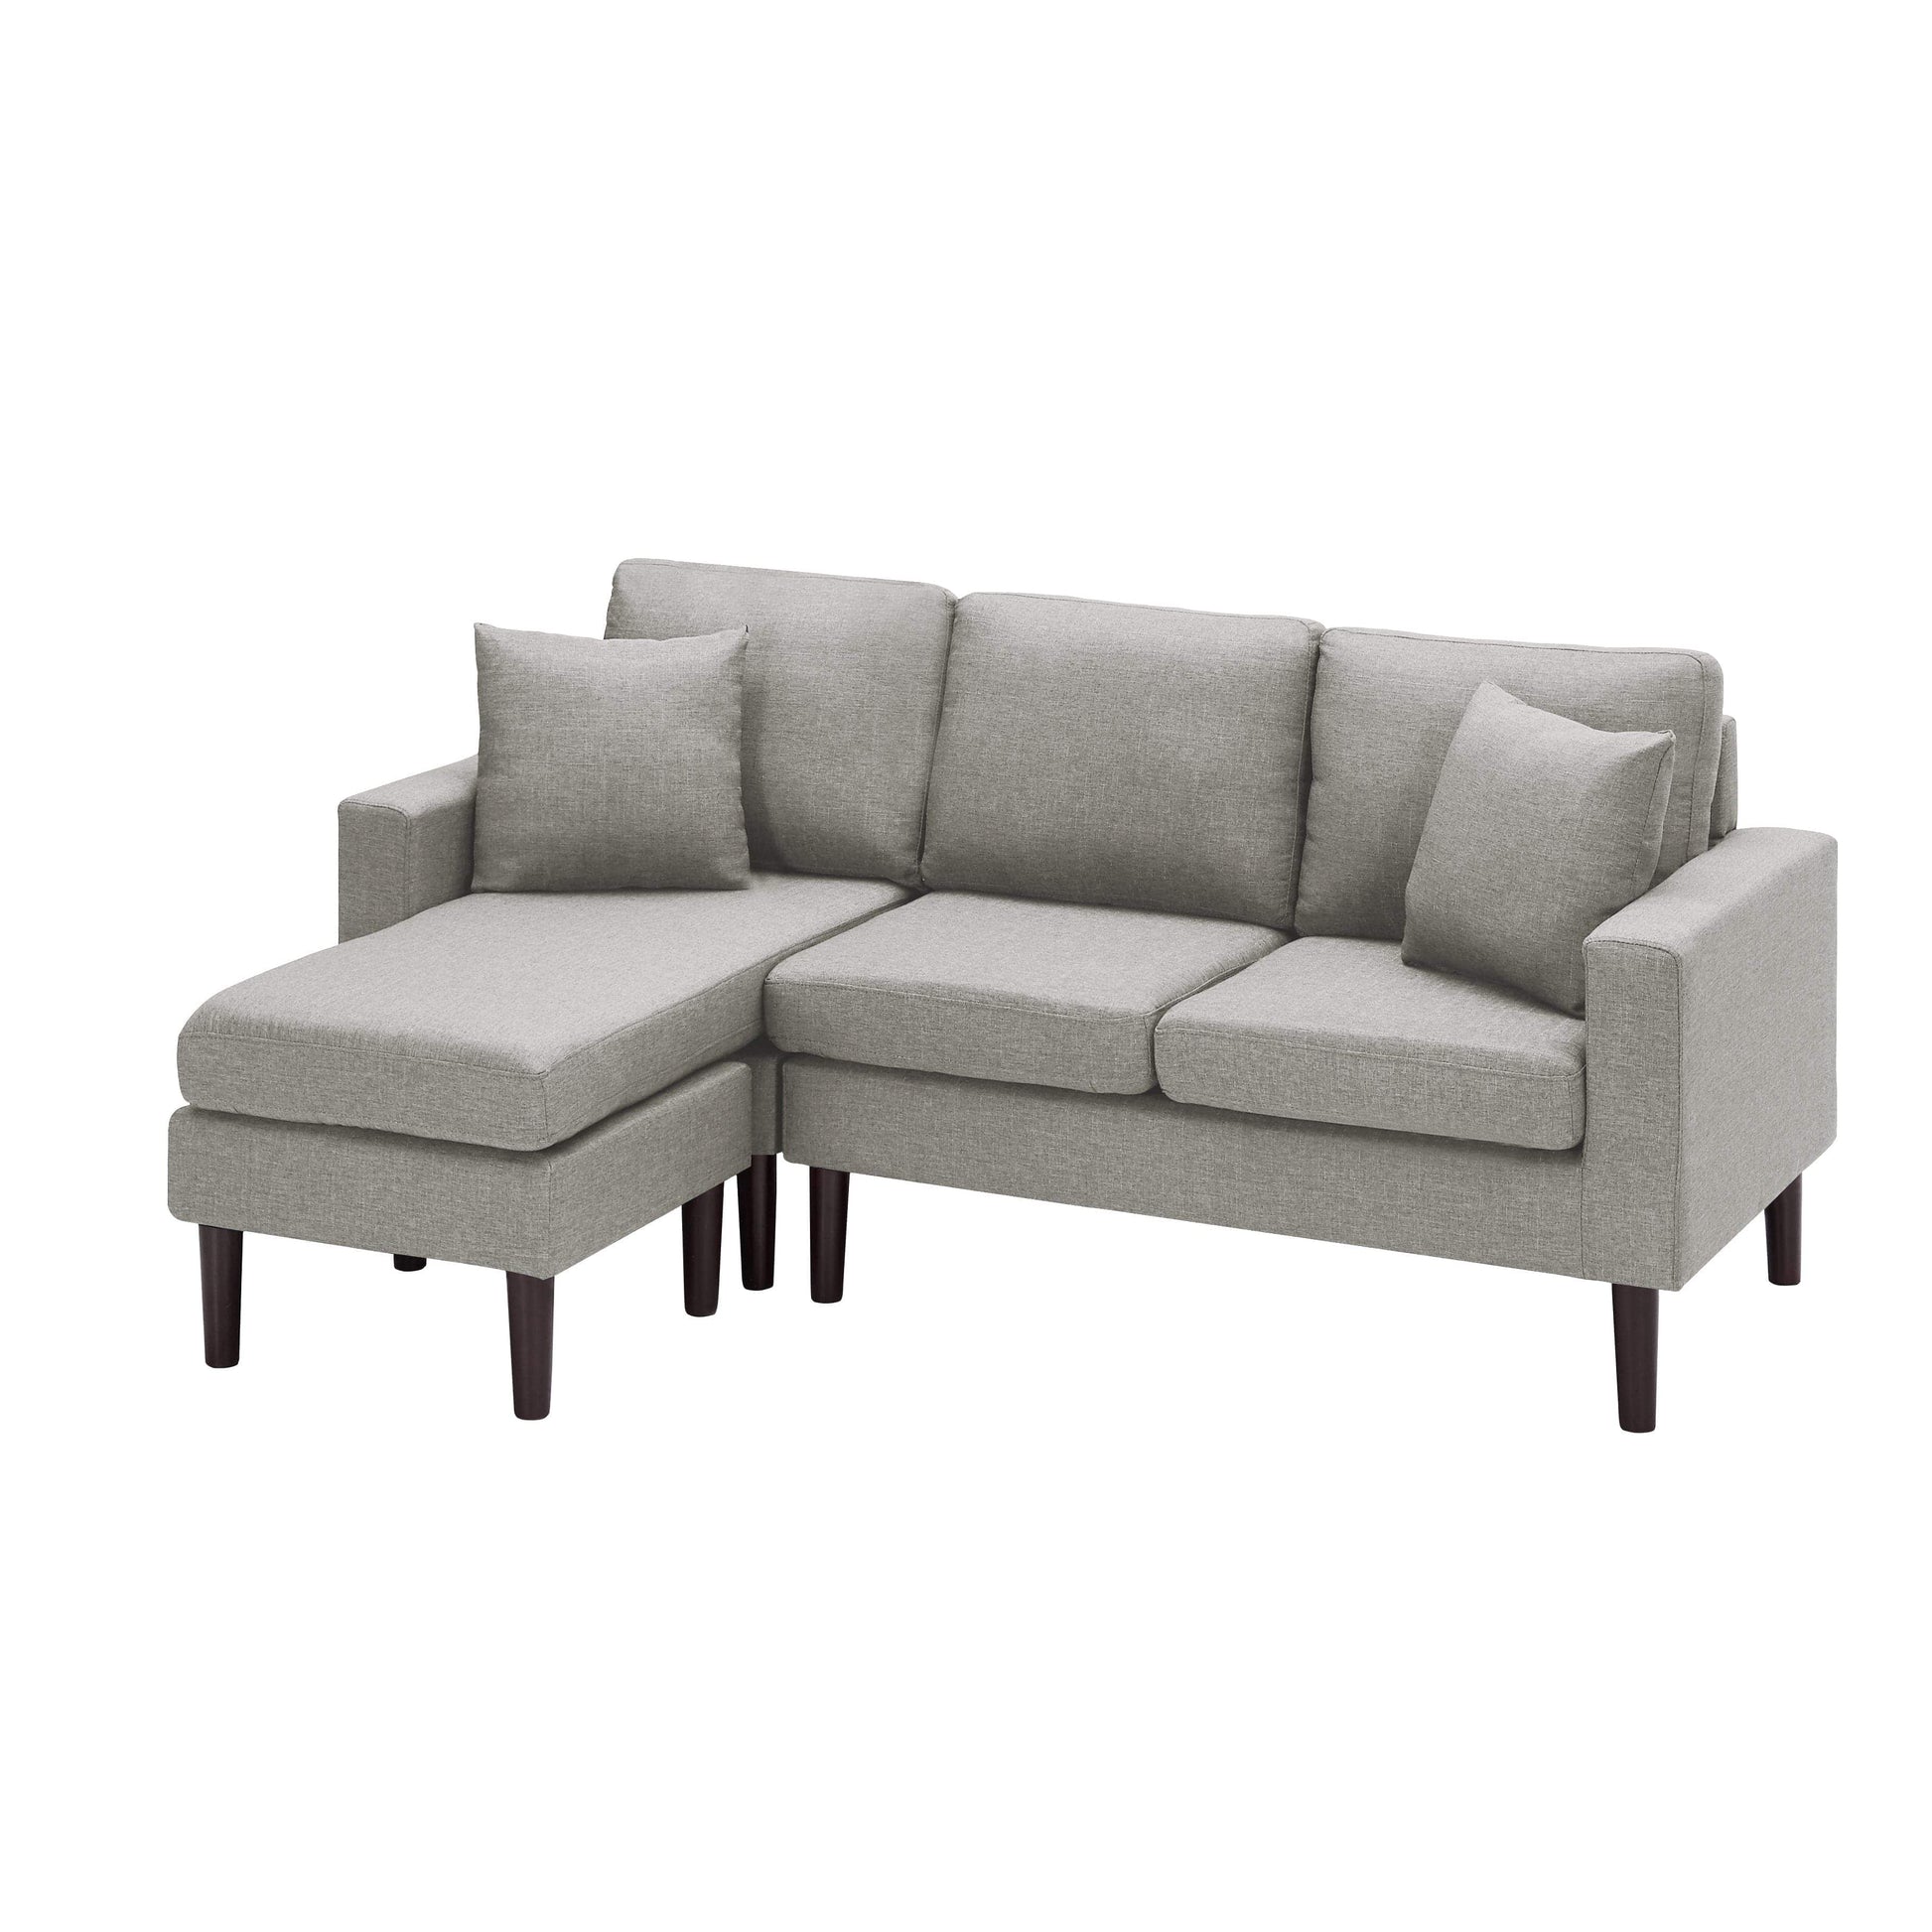 TFC&H Co. 72" Sectional Sofa Left Hand Facing w/ 2 Fabric Pillows- Ships from The US - sectional at TFC&H Co.